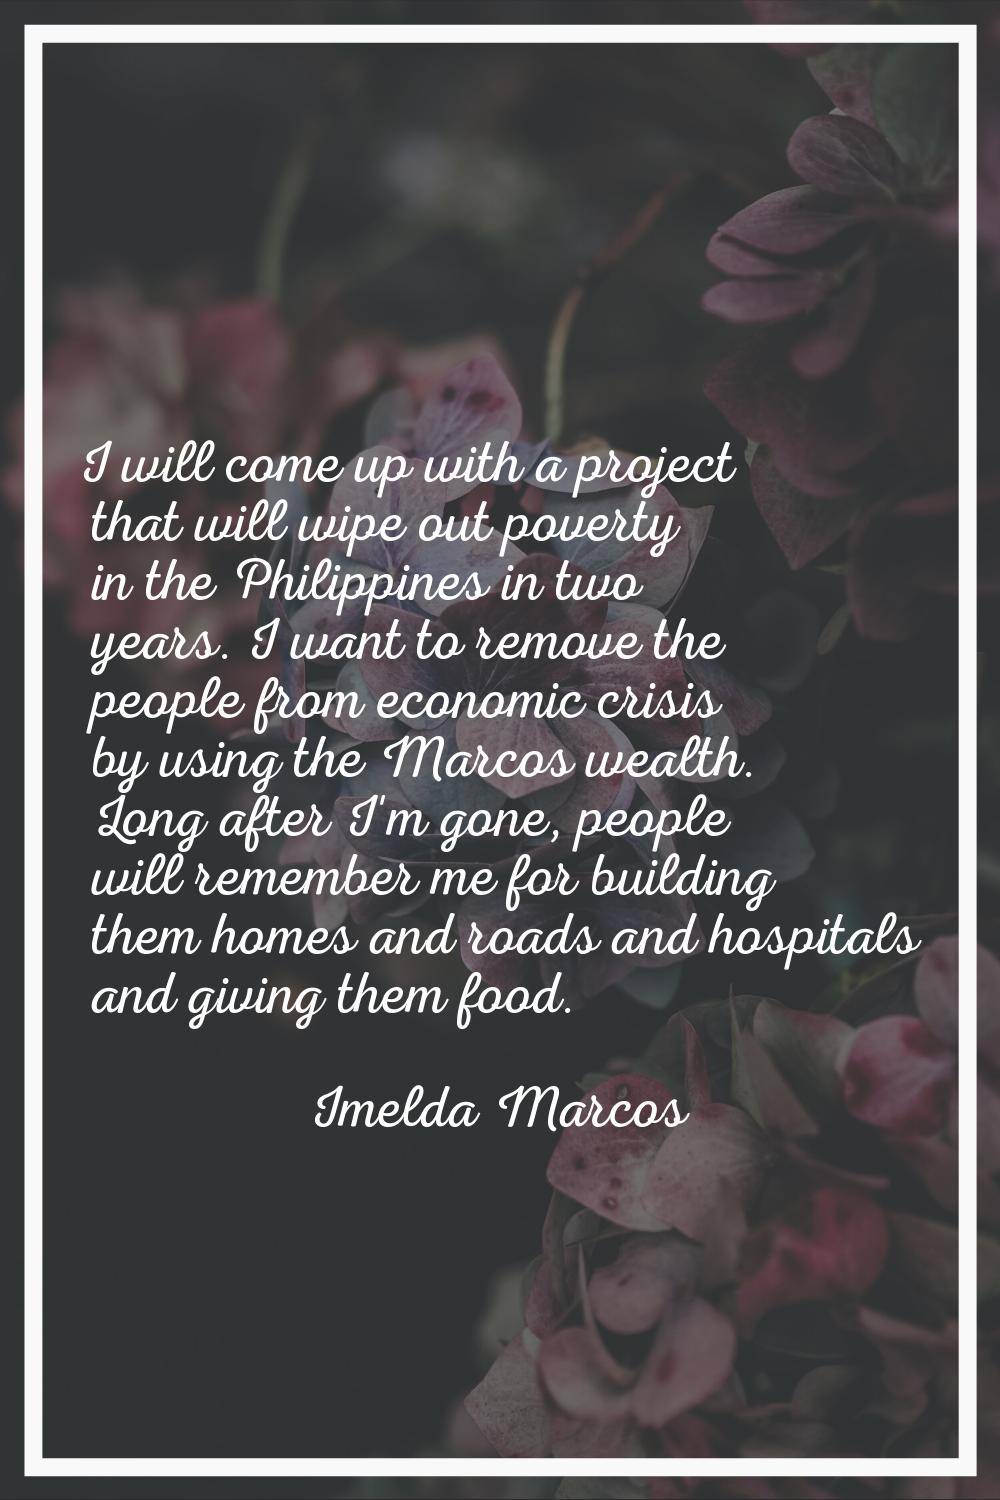 I will come up with a project that will wipe out poverty in the Philippines in two years. I want to